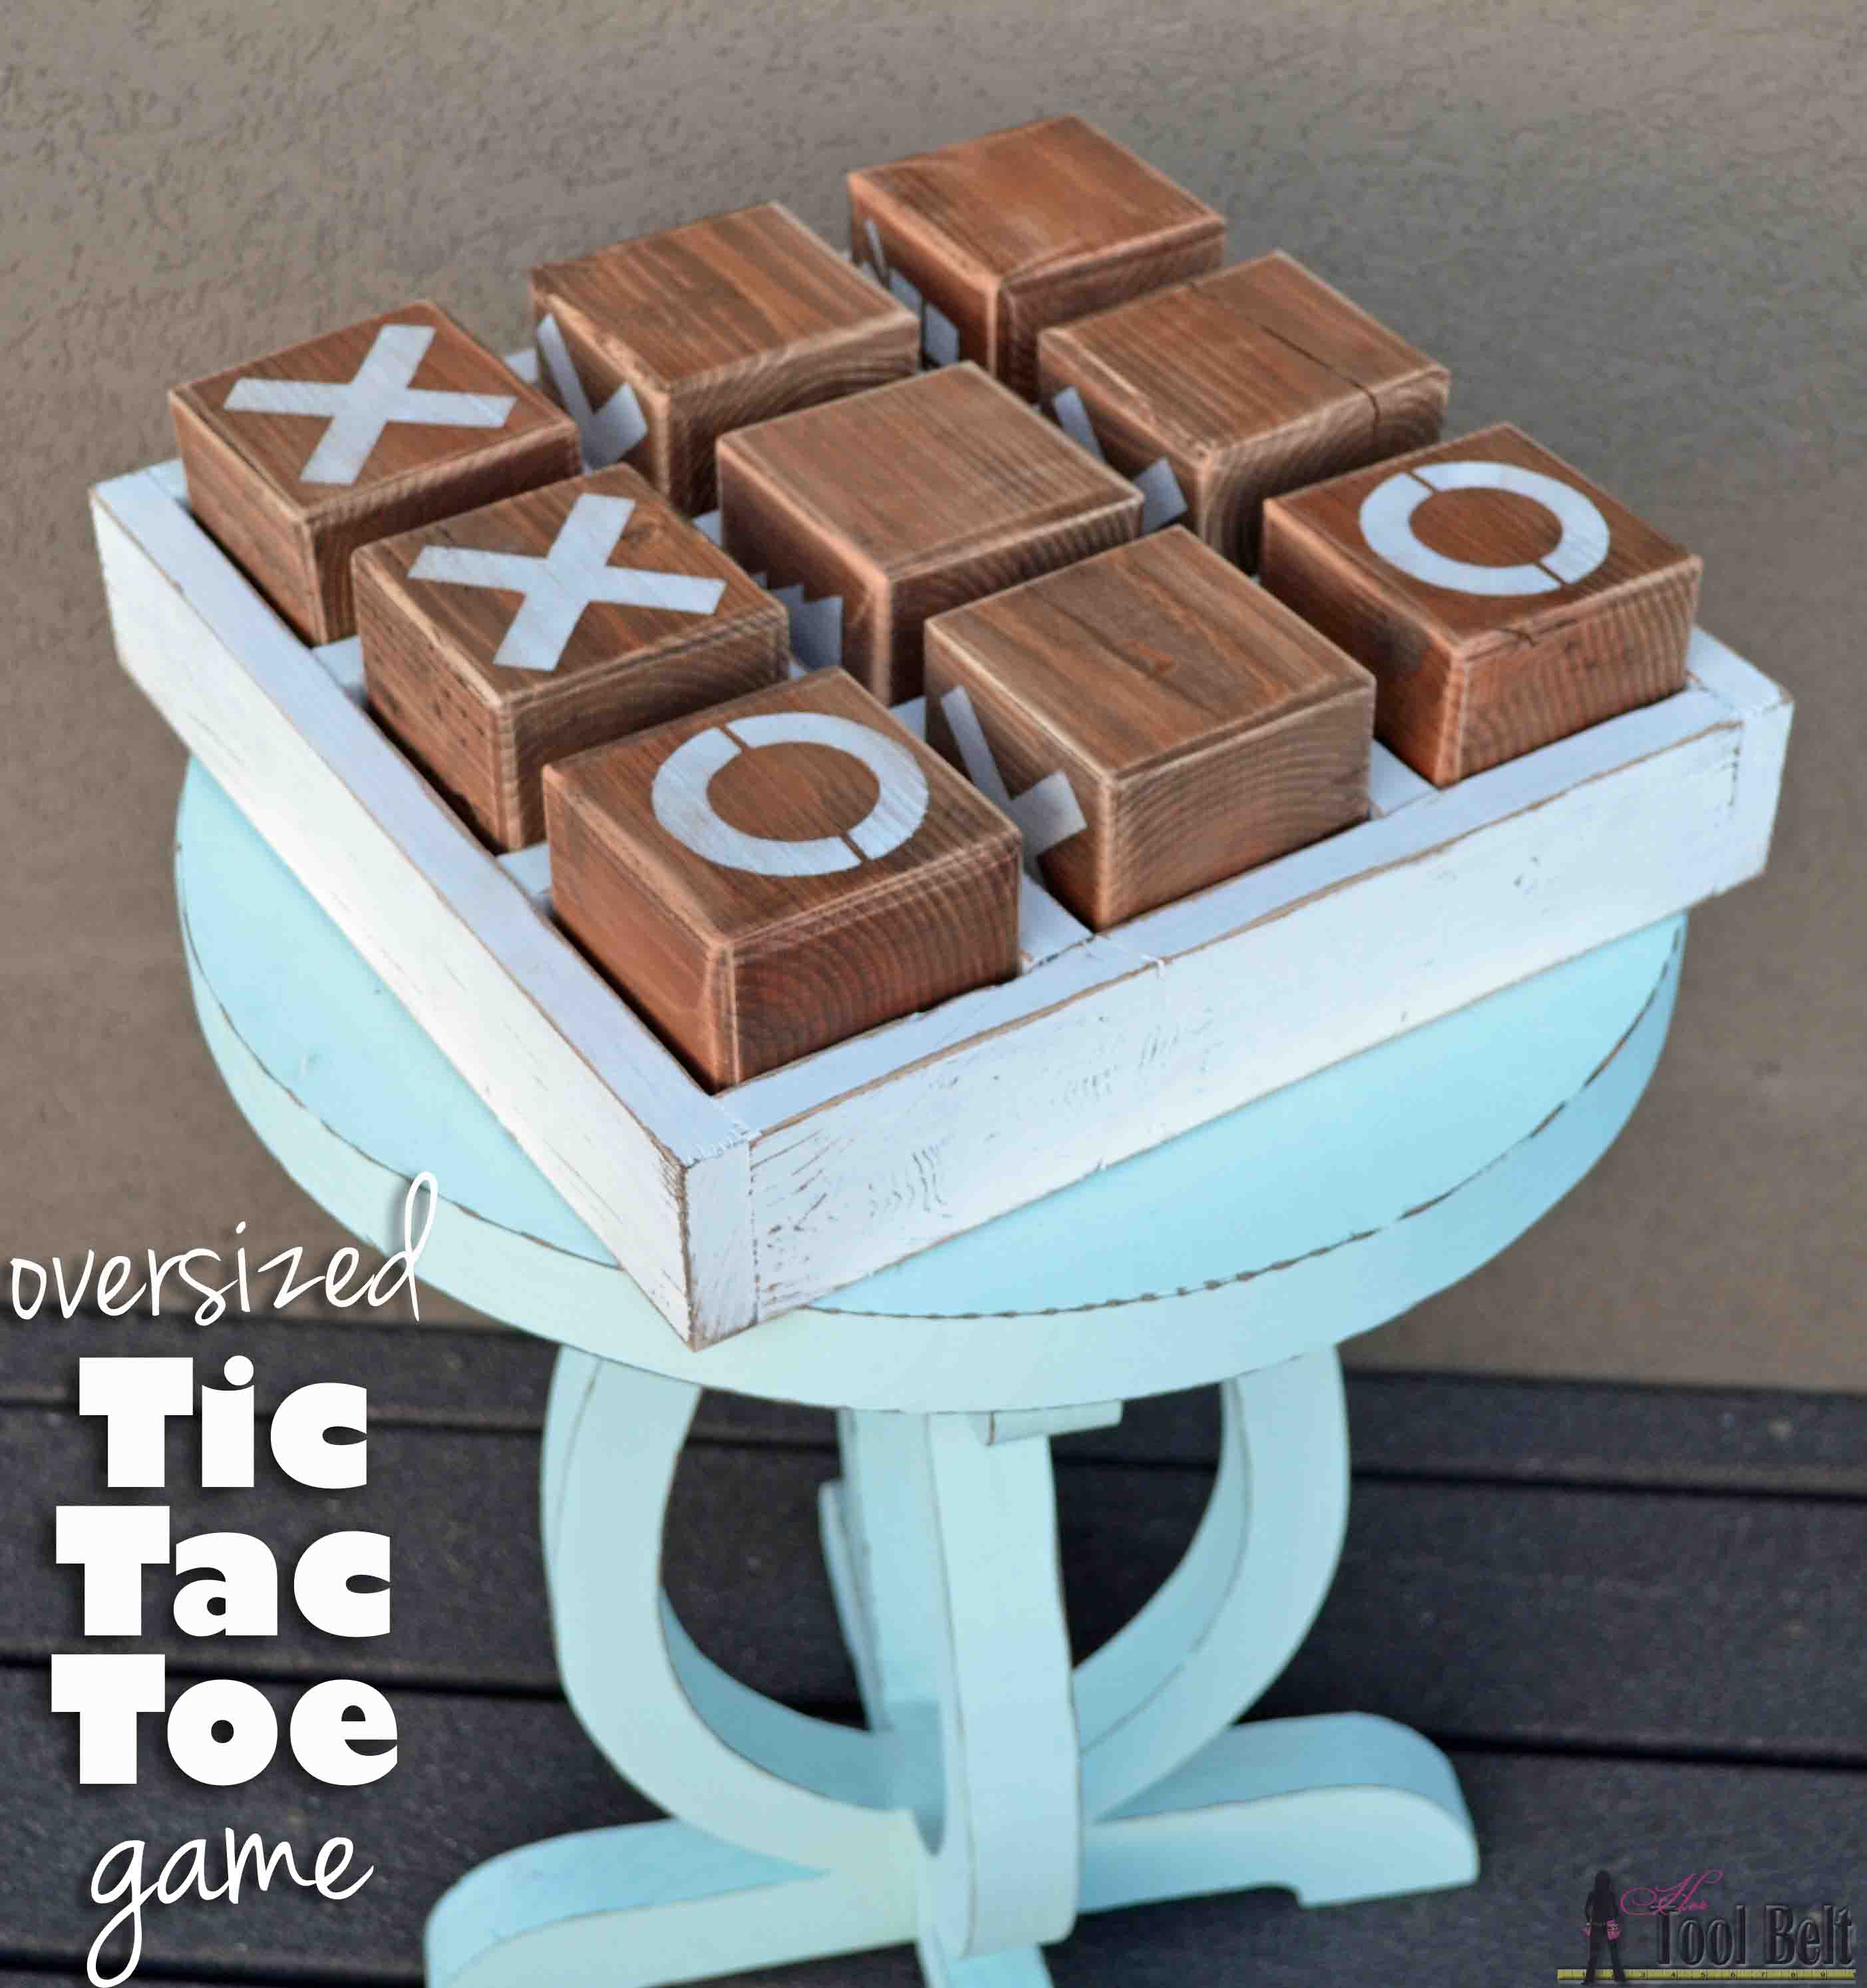 Easily build a fun tic tac toe game to sit on the ottoman or side table. Free plans